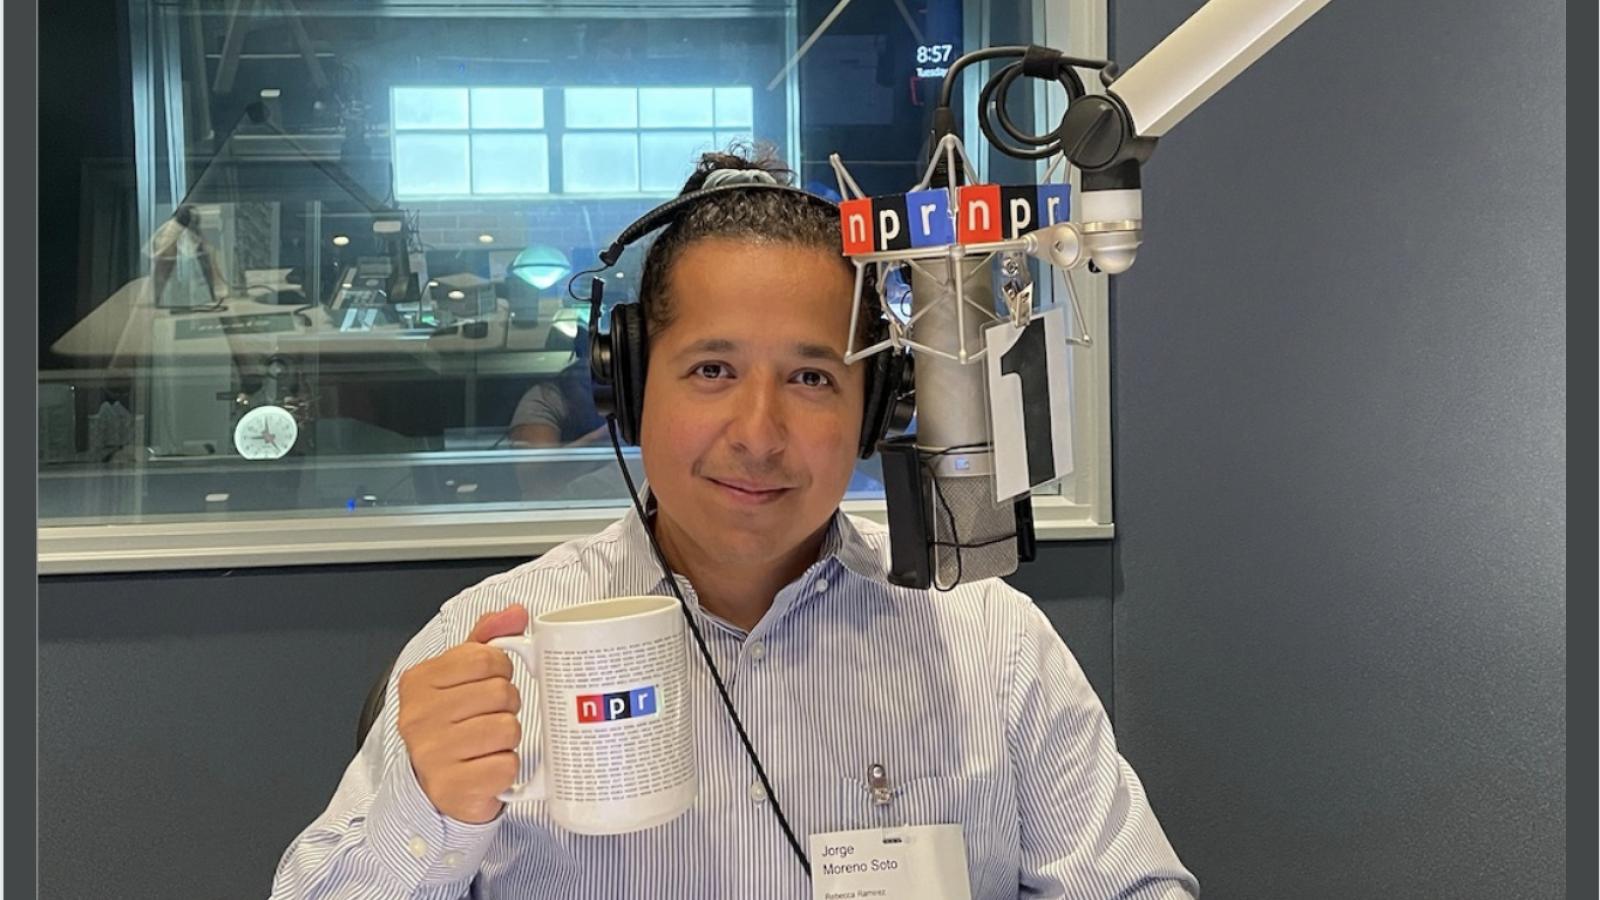 Jorge Moreno poses for photo lifting cup that says NPR behind a microphone